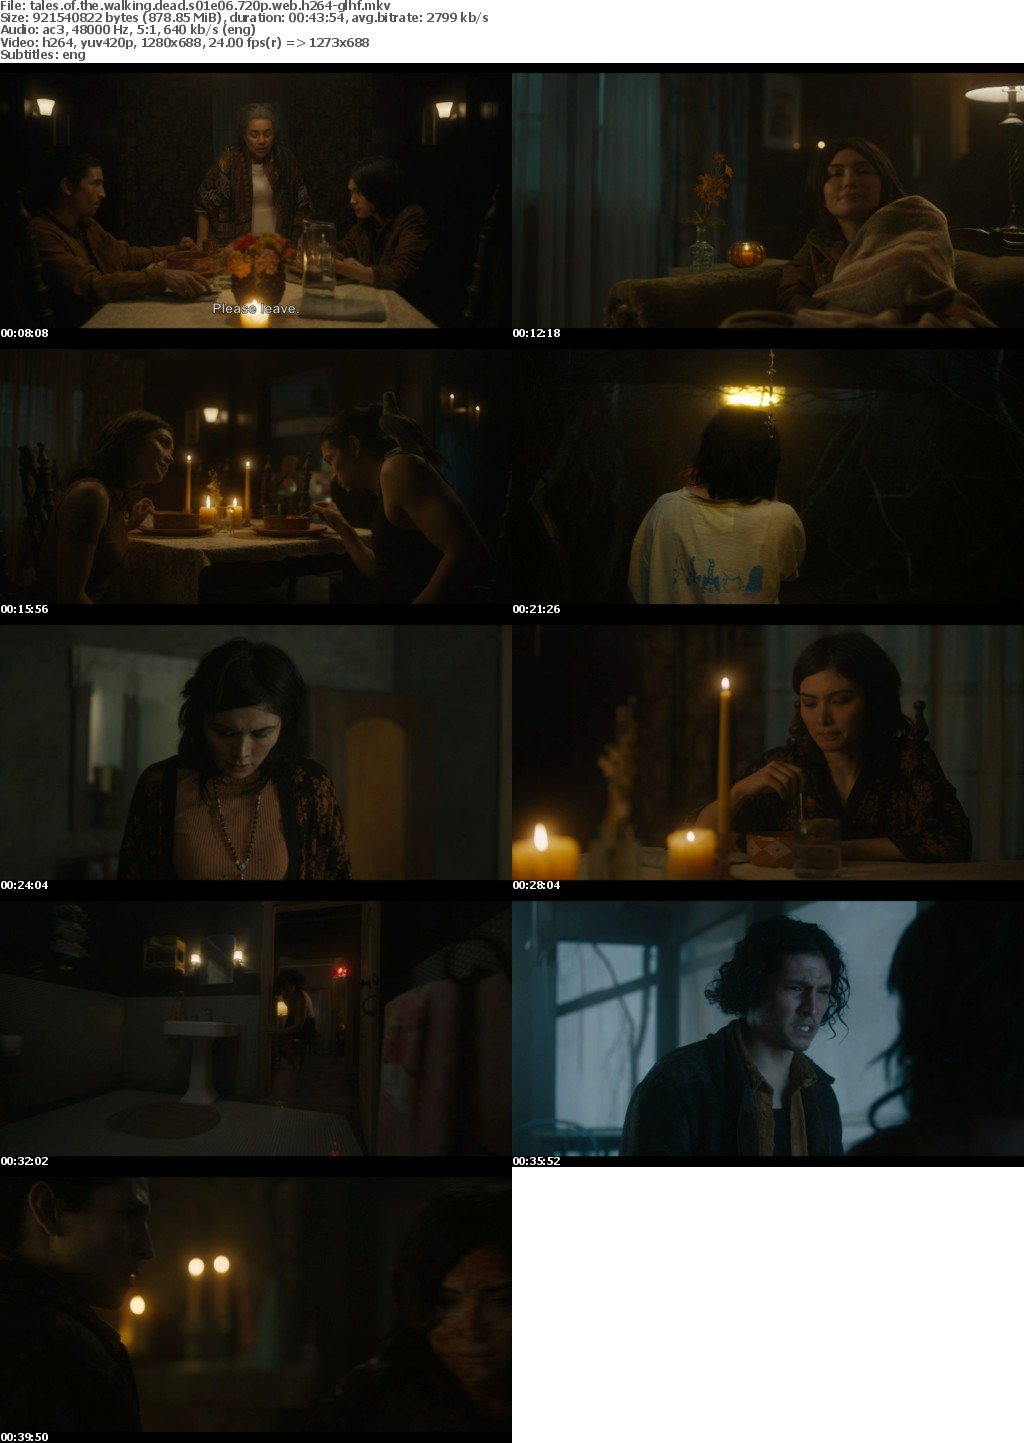 Tales of the Walking Dead S01E06 720p WEB H264-GLHF